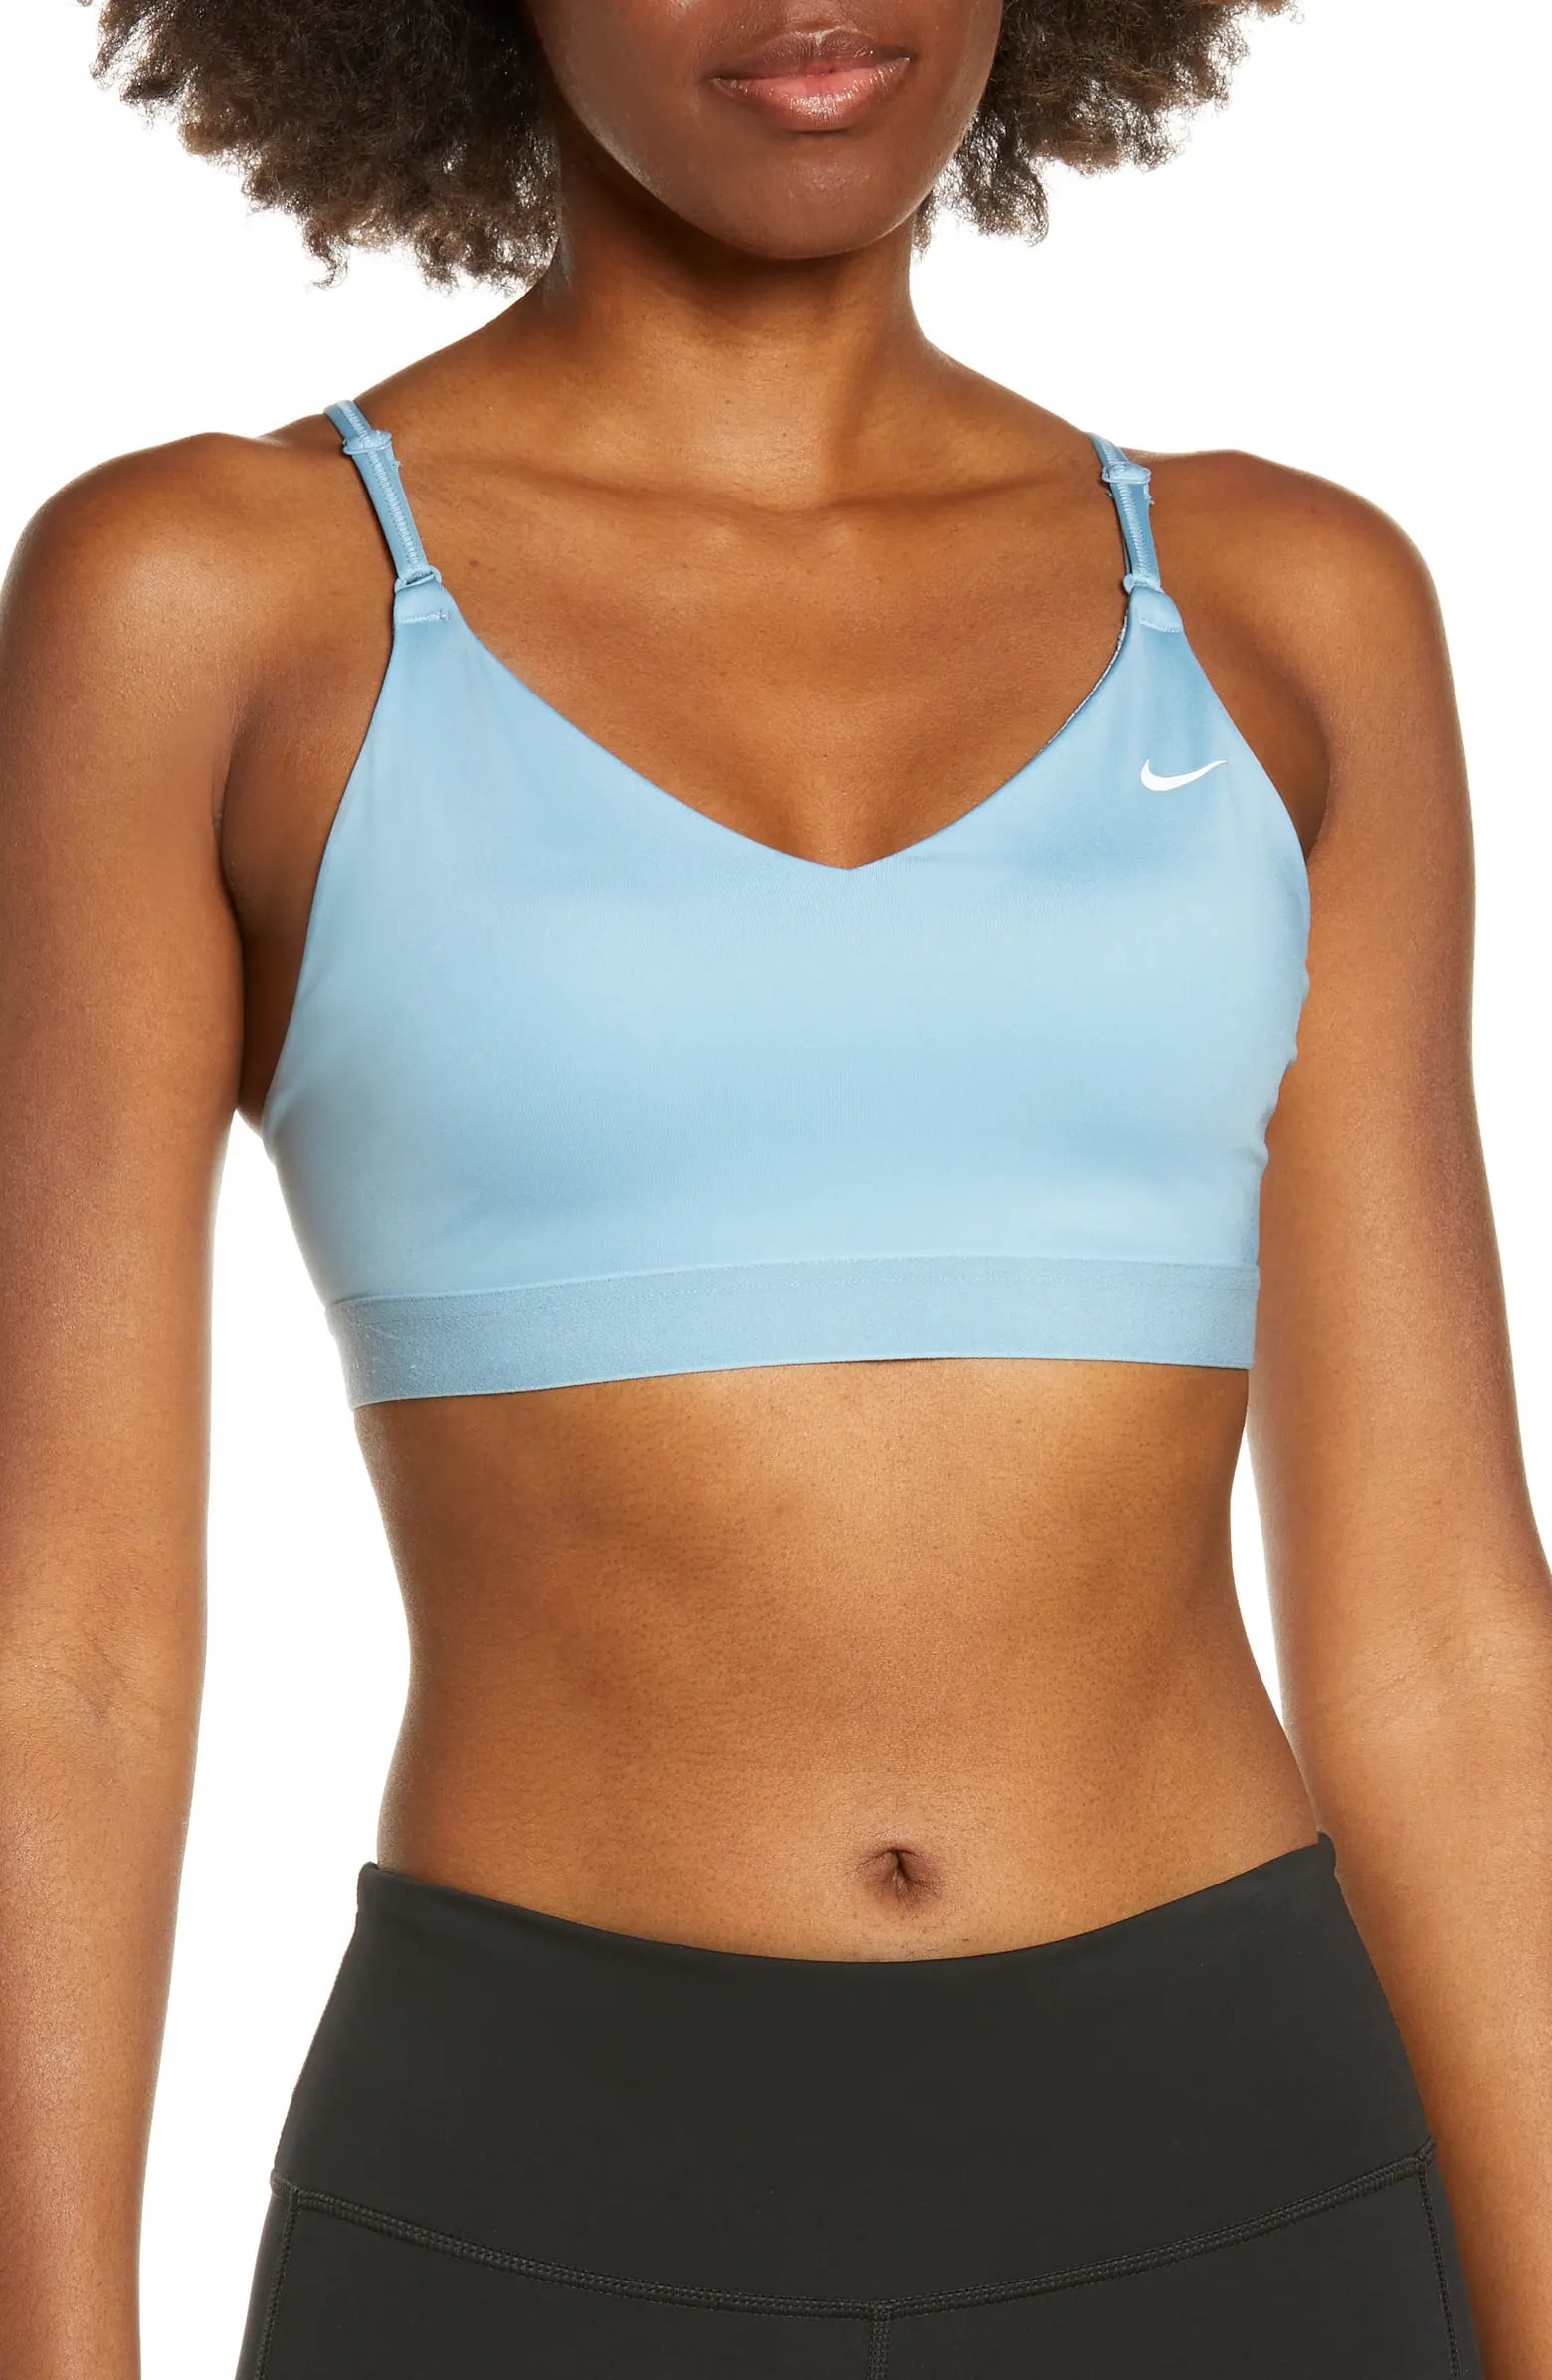 Nike Dri Fit Indy Sports Bra - Get Best Price from Manufacturers